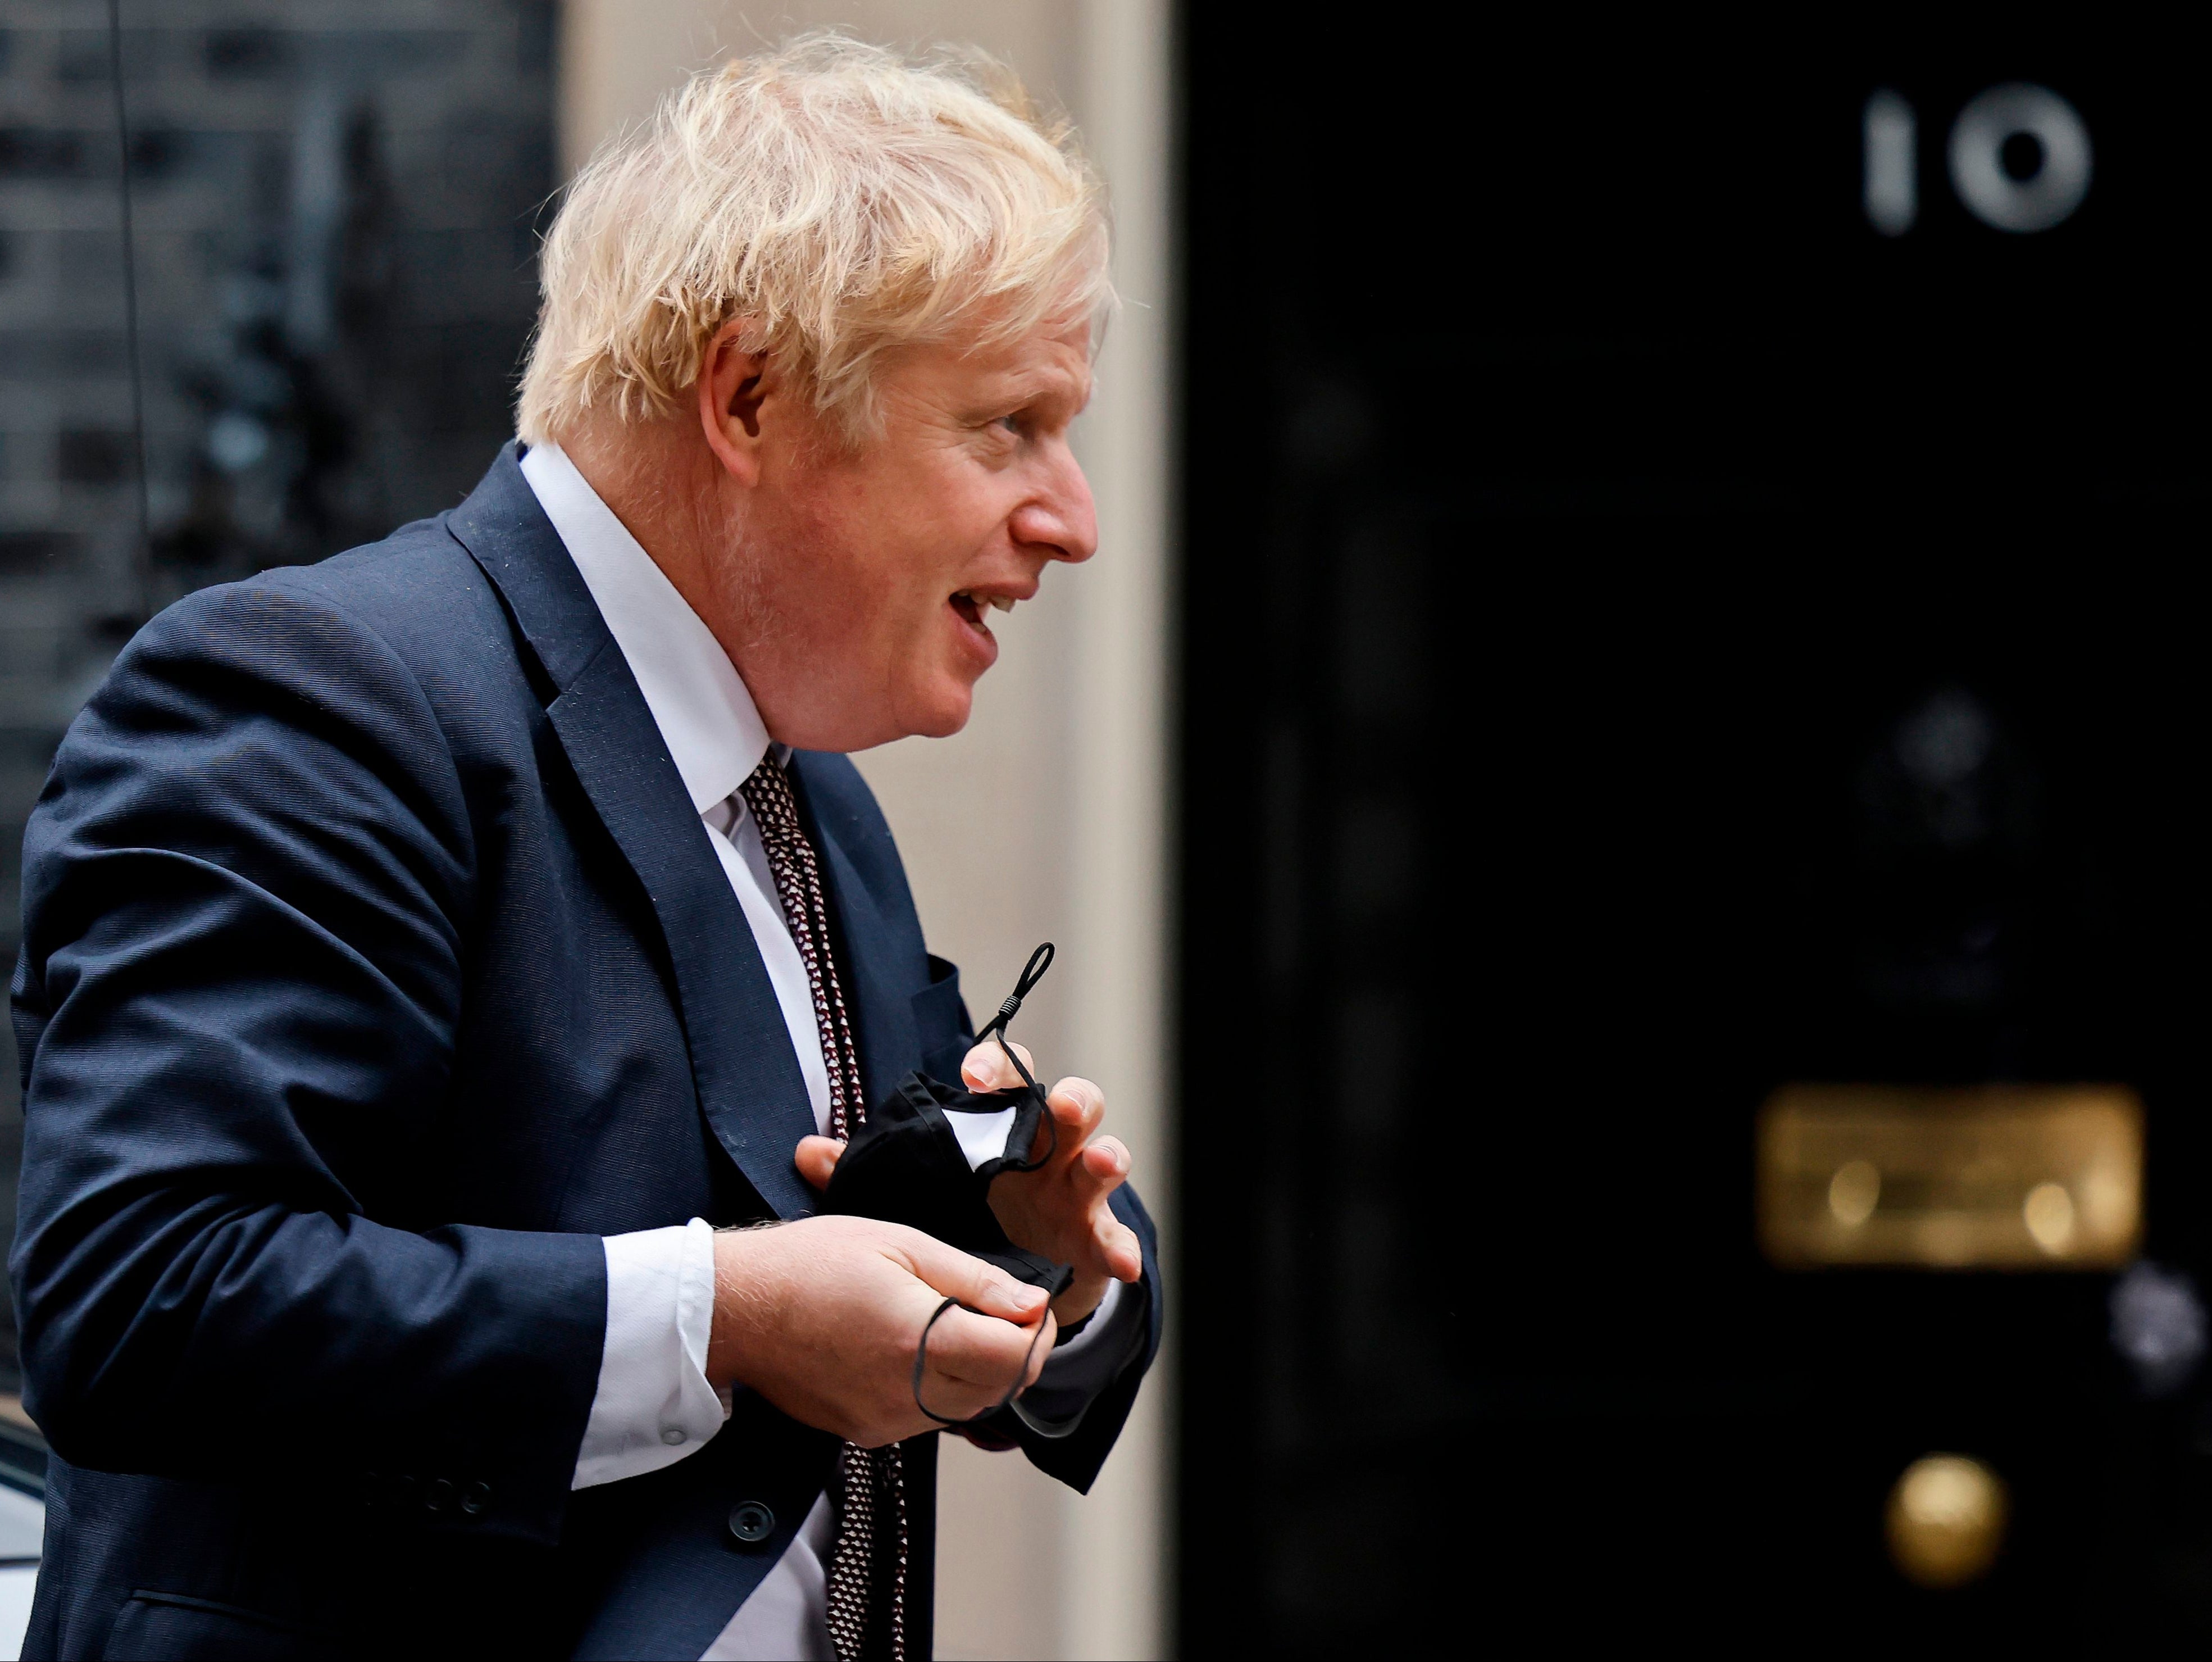 By the time Boris Johnson arrives back in Downing Street this week, he needs to have secured an EU deal